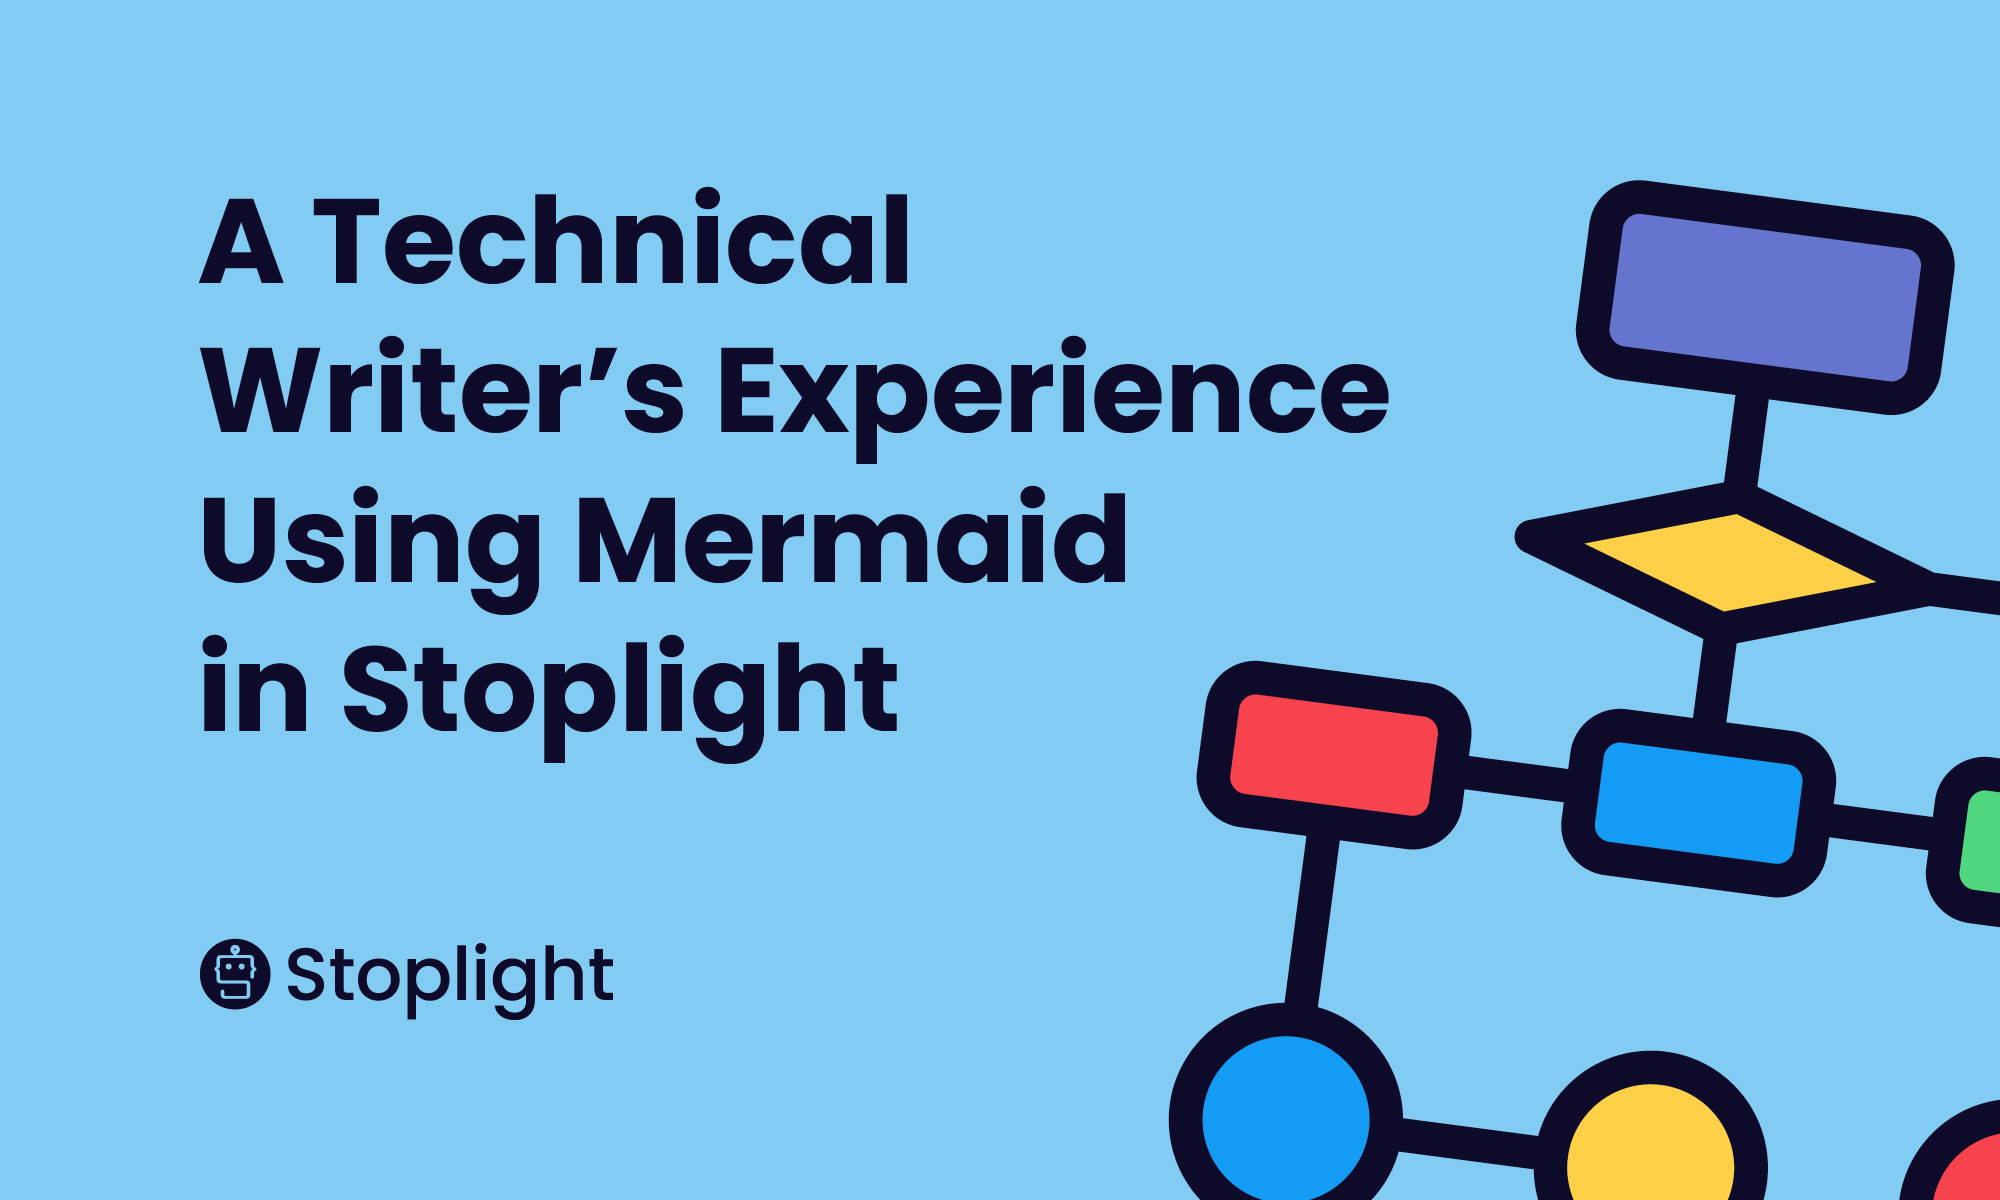 A Technical Writer’s Experience Using Mermaid in Stoplight